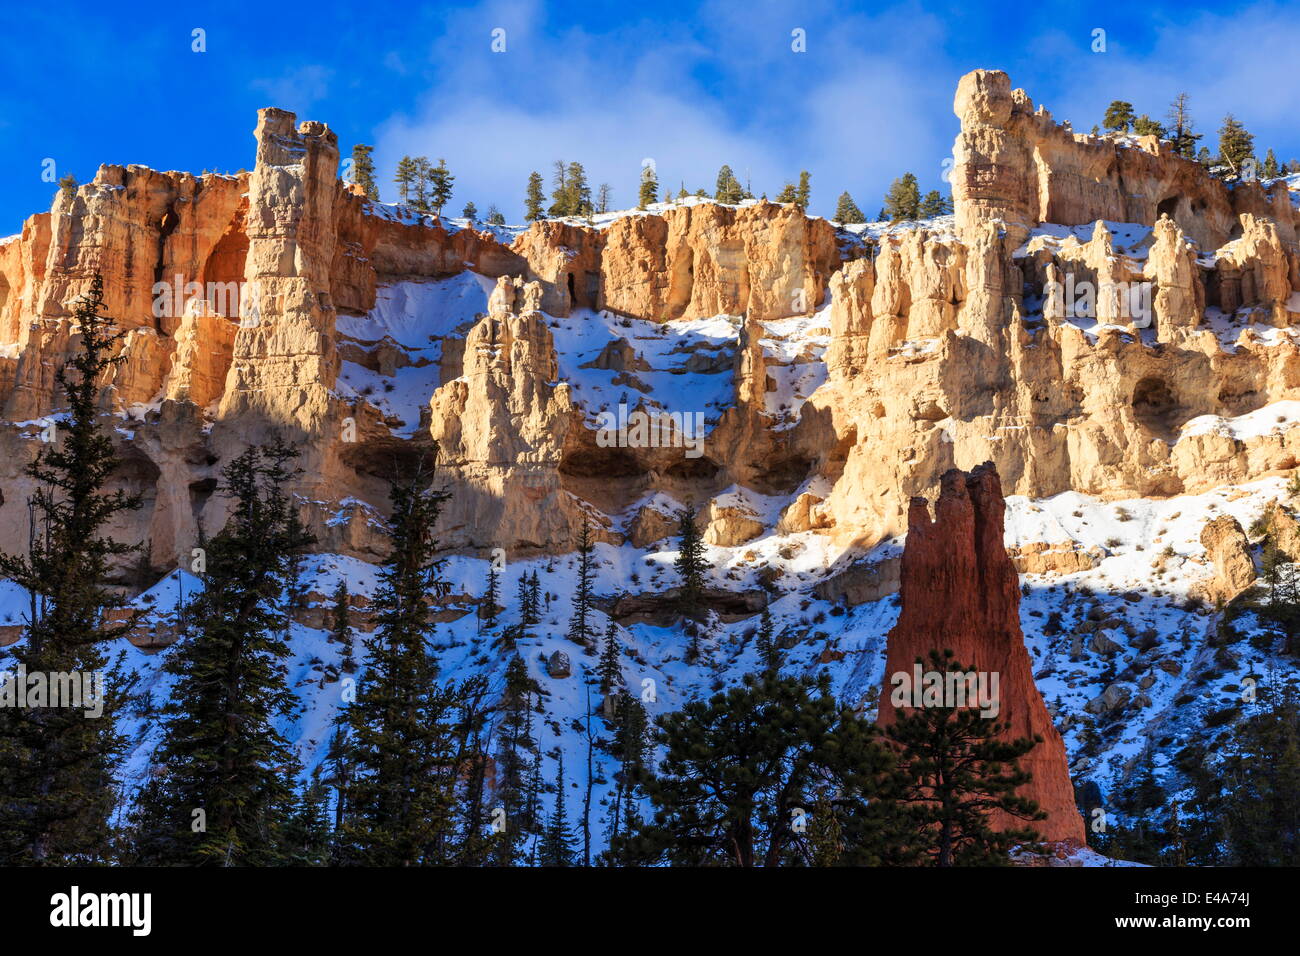 Snowy cliffs from Peekaboo Loop Trail, Bryce Canyon National Park, Utah, United States of America, North America Stock Photo